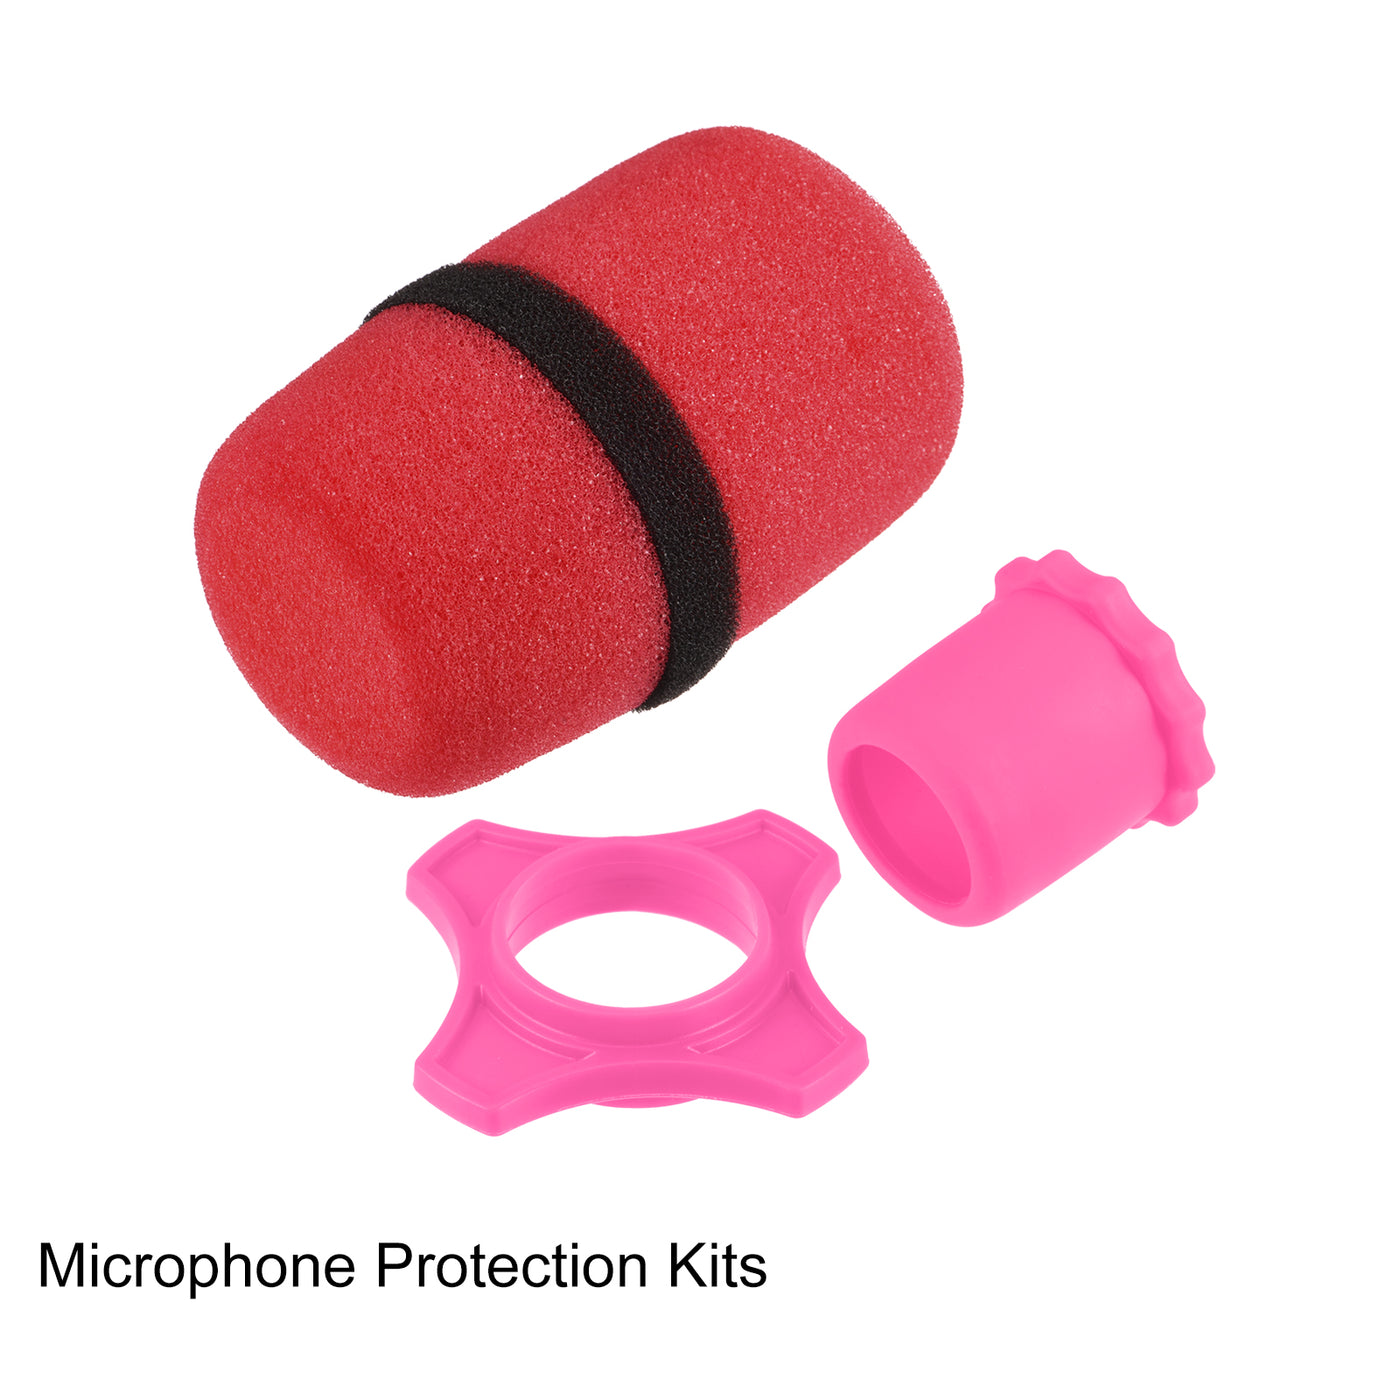 Harfington Microphone Cover, Anti Fall Rubber Ring and Mic Bottom Rod Holder Sleeve Red for KTV Mic Device, 5 Set